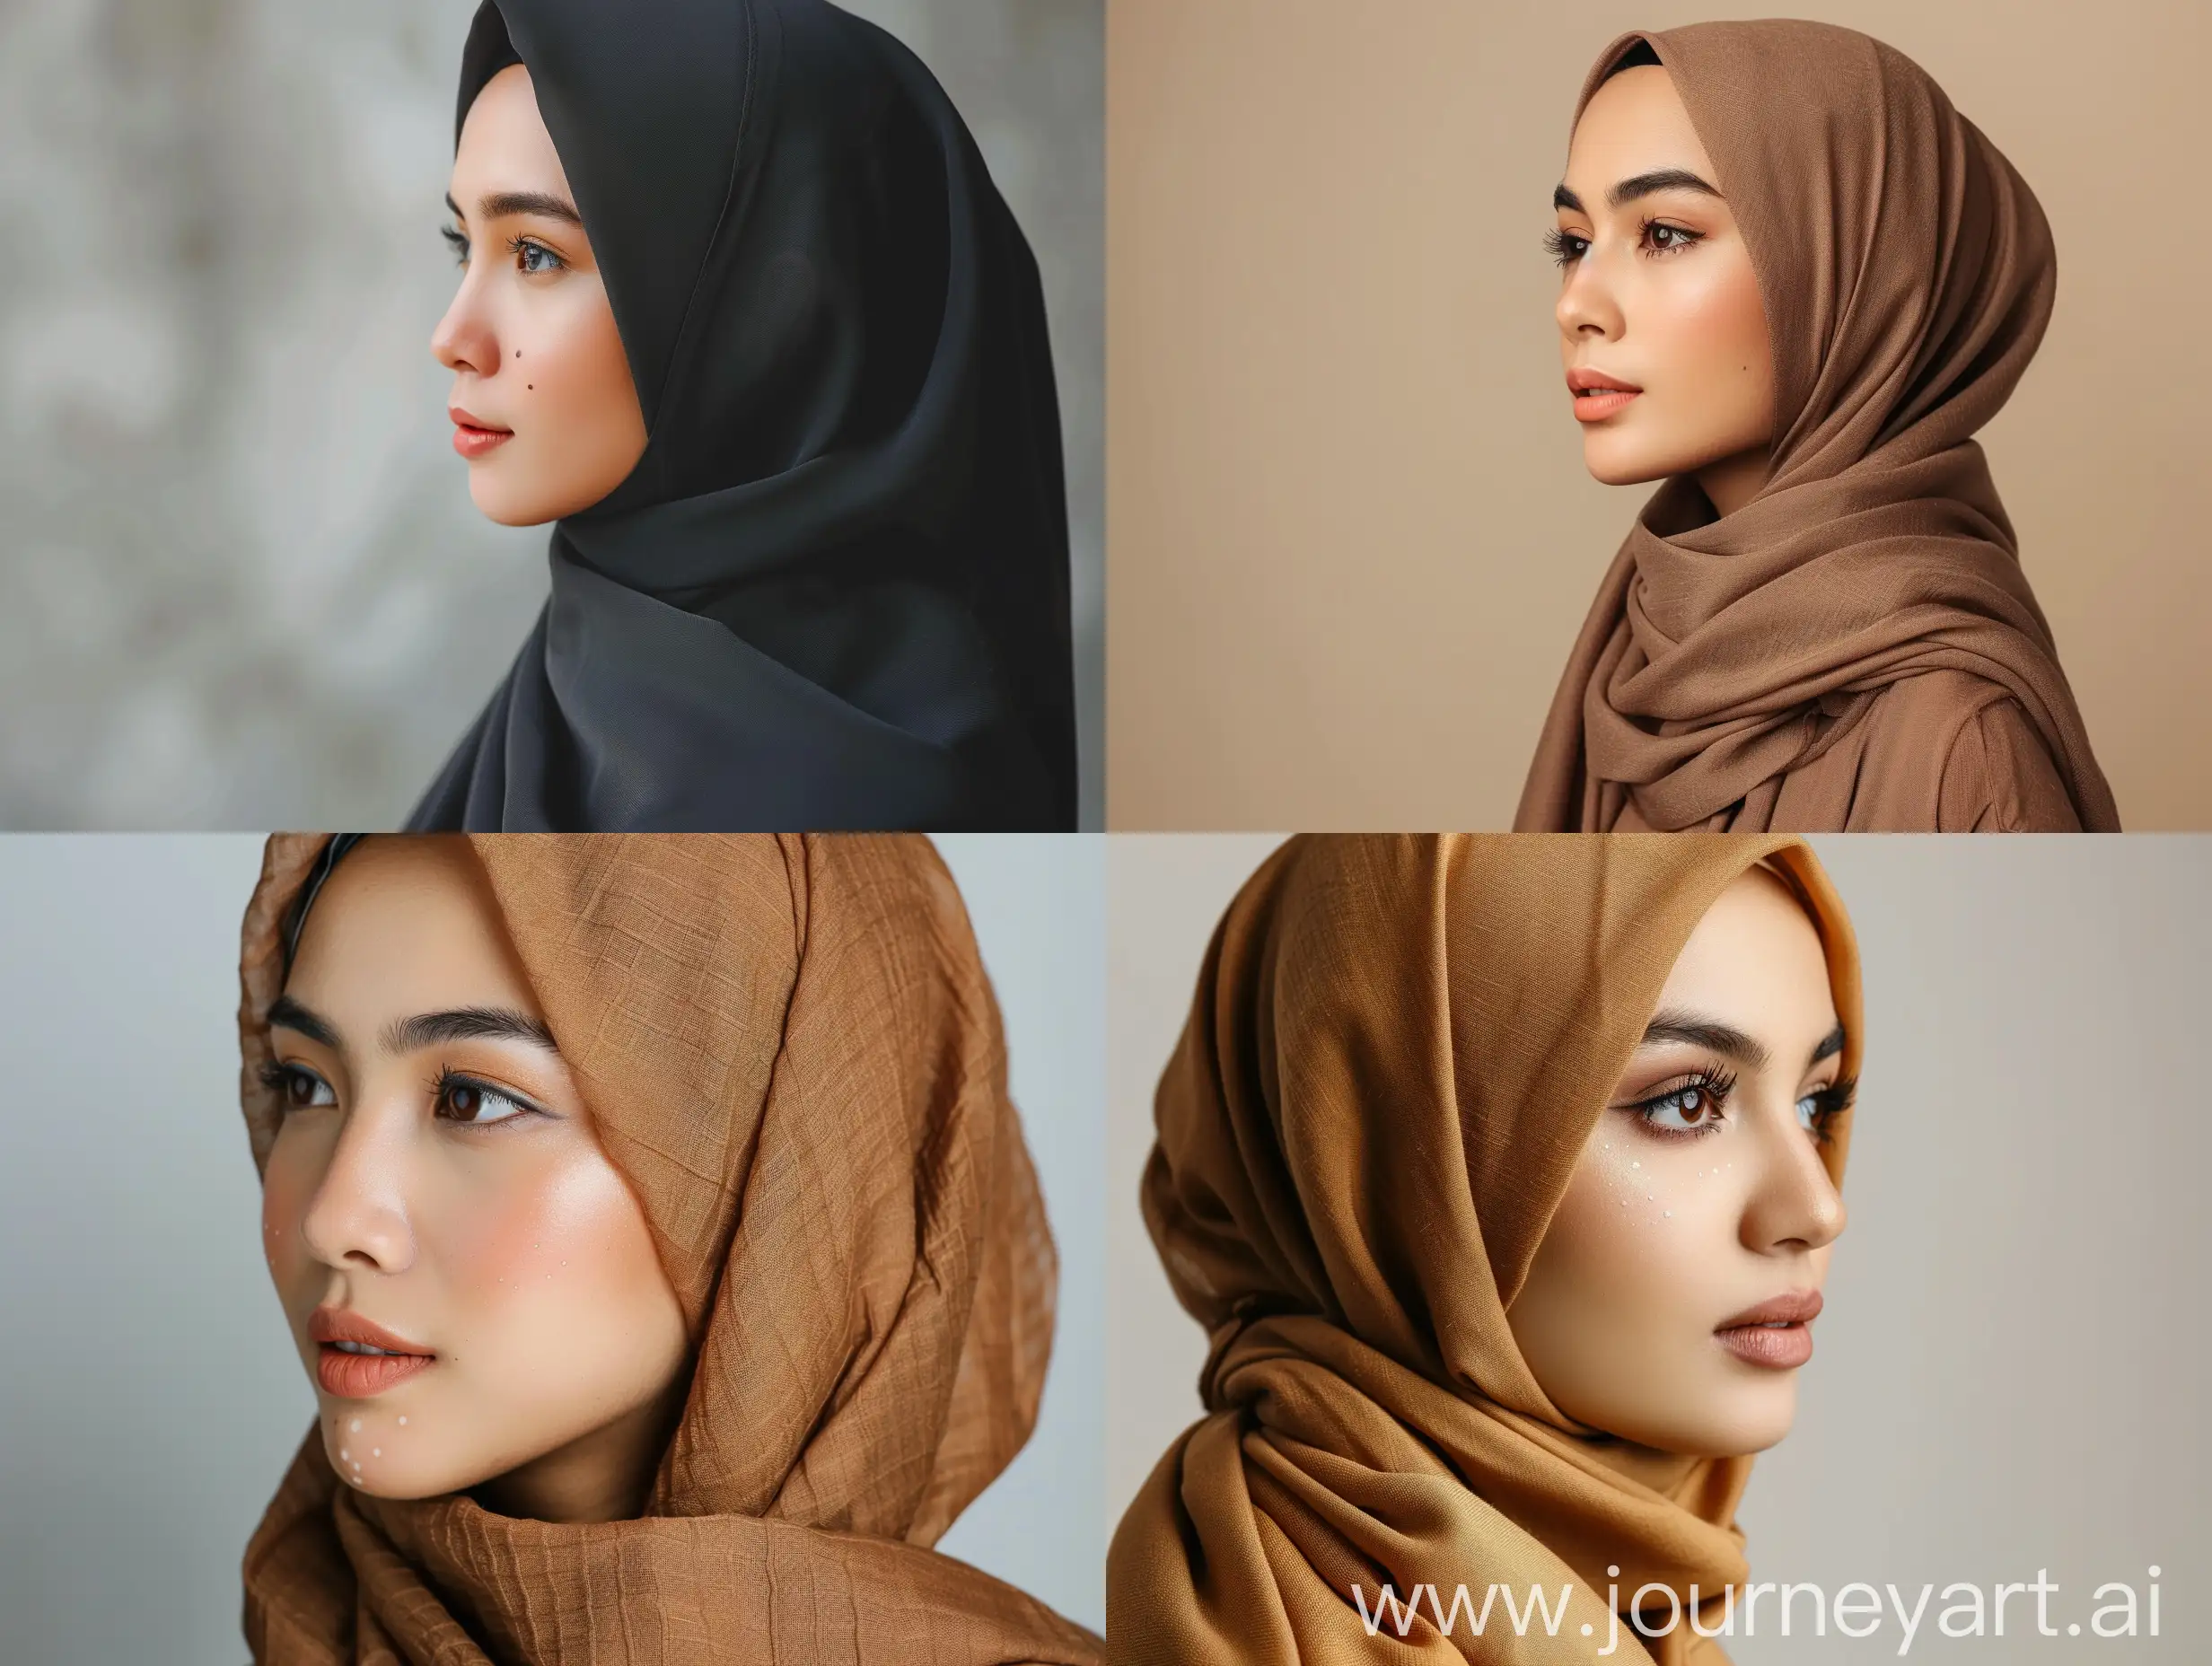 Stunning-Indonesian-Woman-in-Hijab-with-Cheek-Dimples